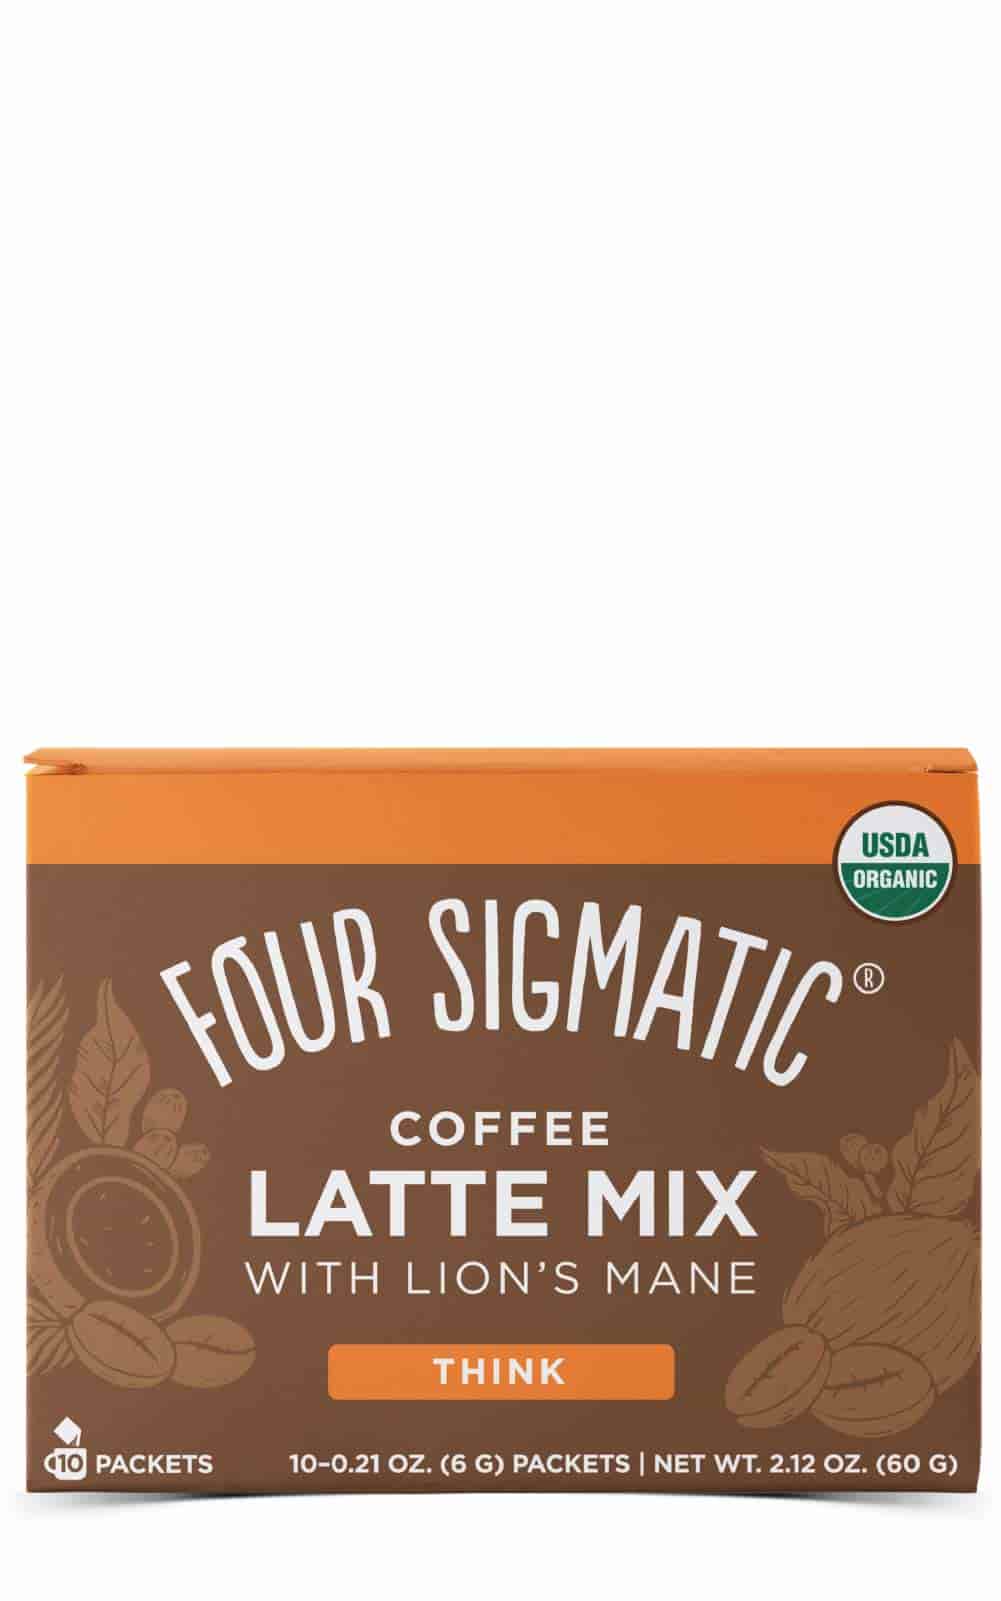 Coffee Latte Mix with Lion's Mane